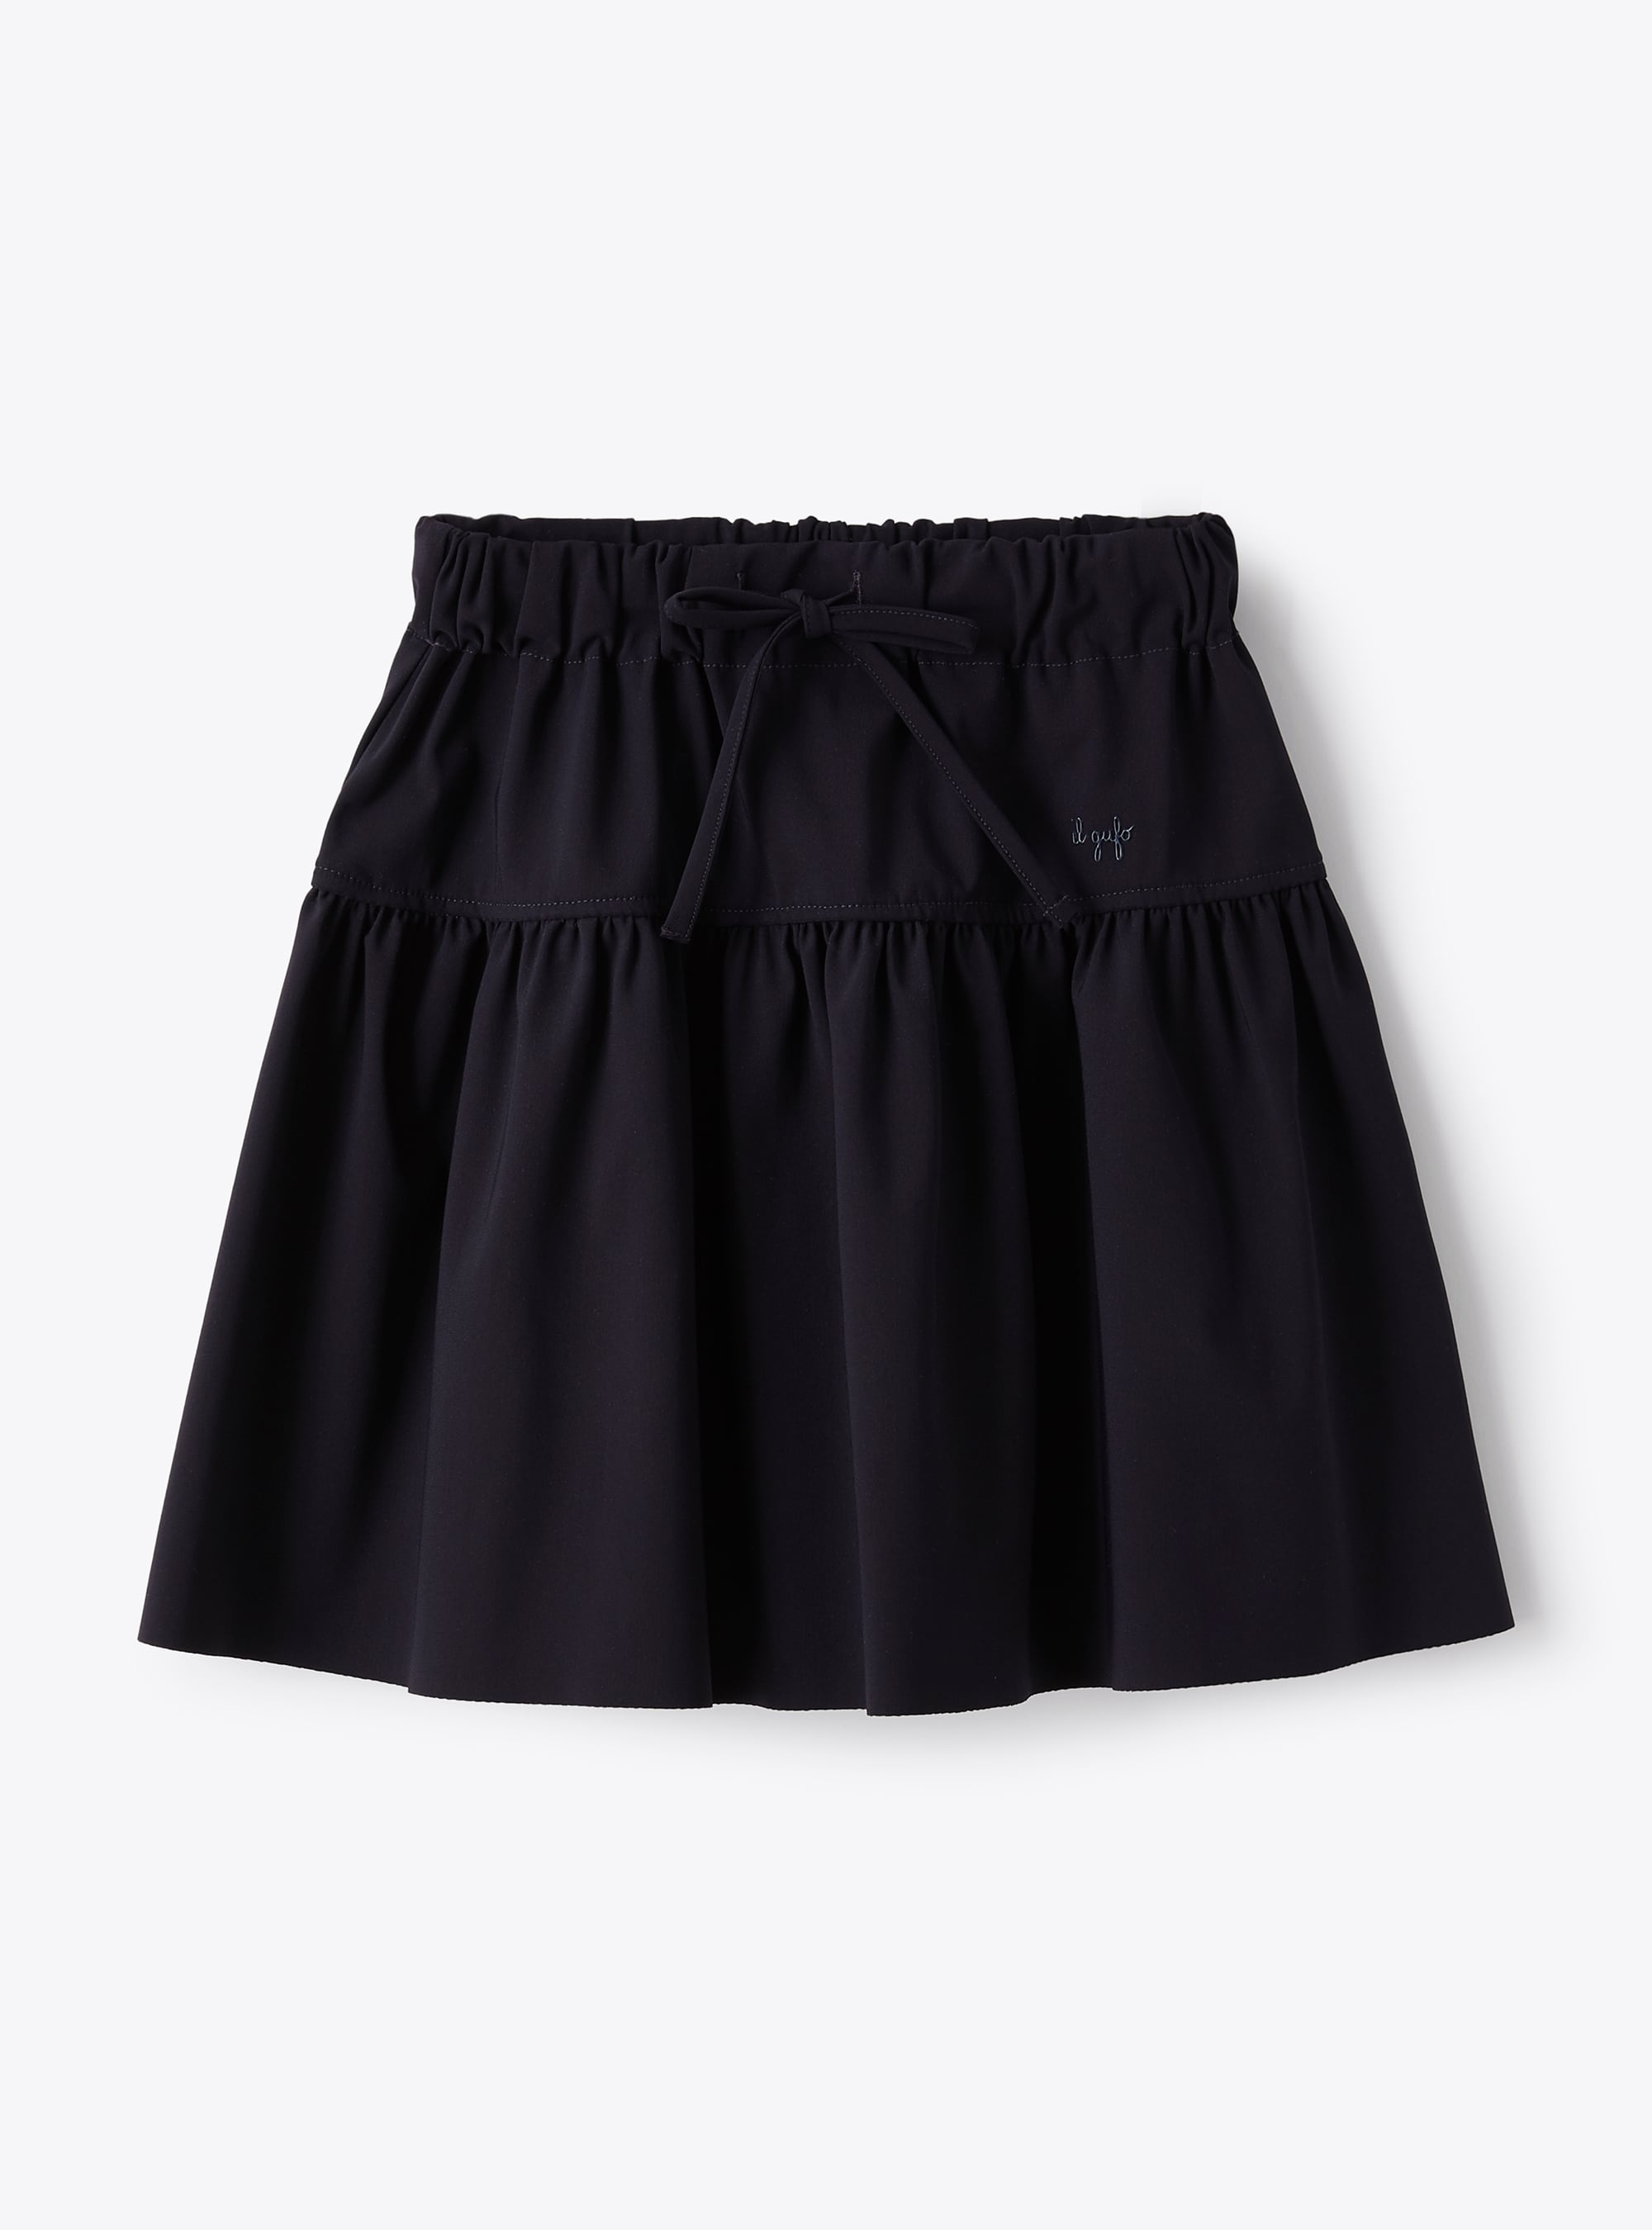 Tiered skirt in Sensitive® Fabrics material - Skirts - Il Gufo